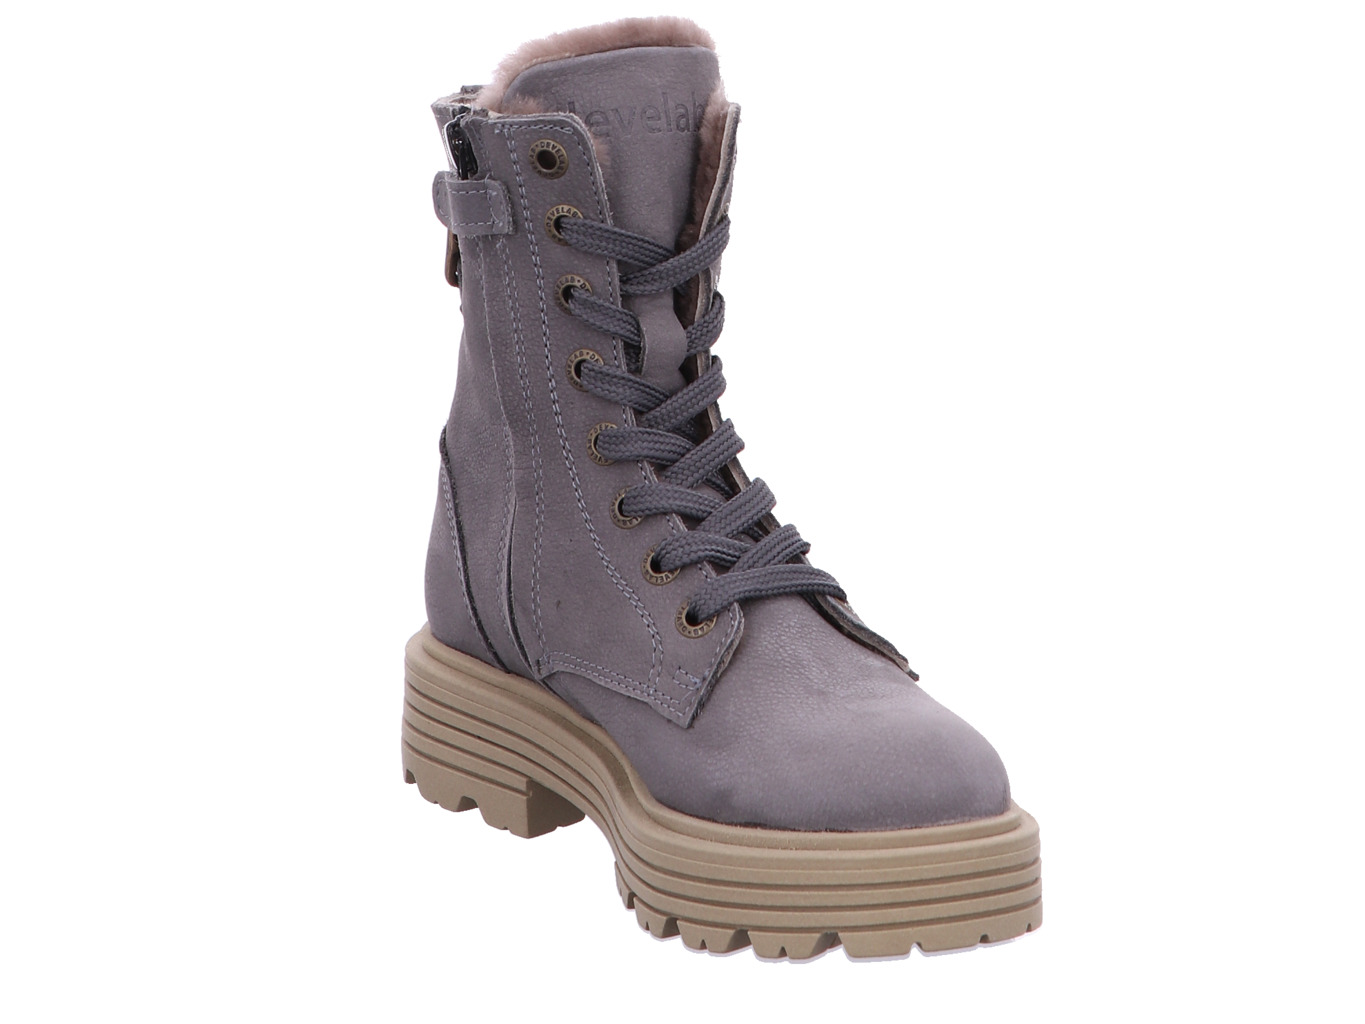 develab_girls_mid_boot_laces_42848_824_6147